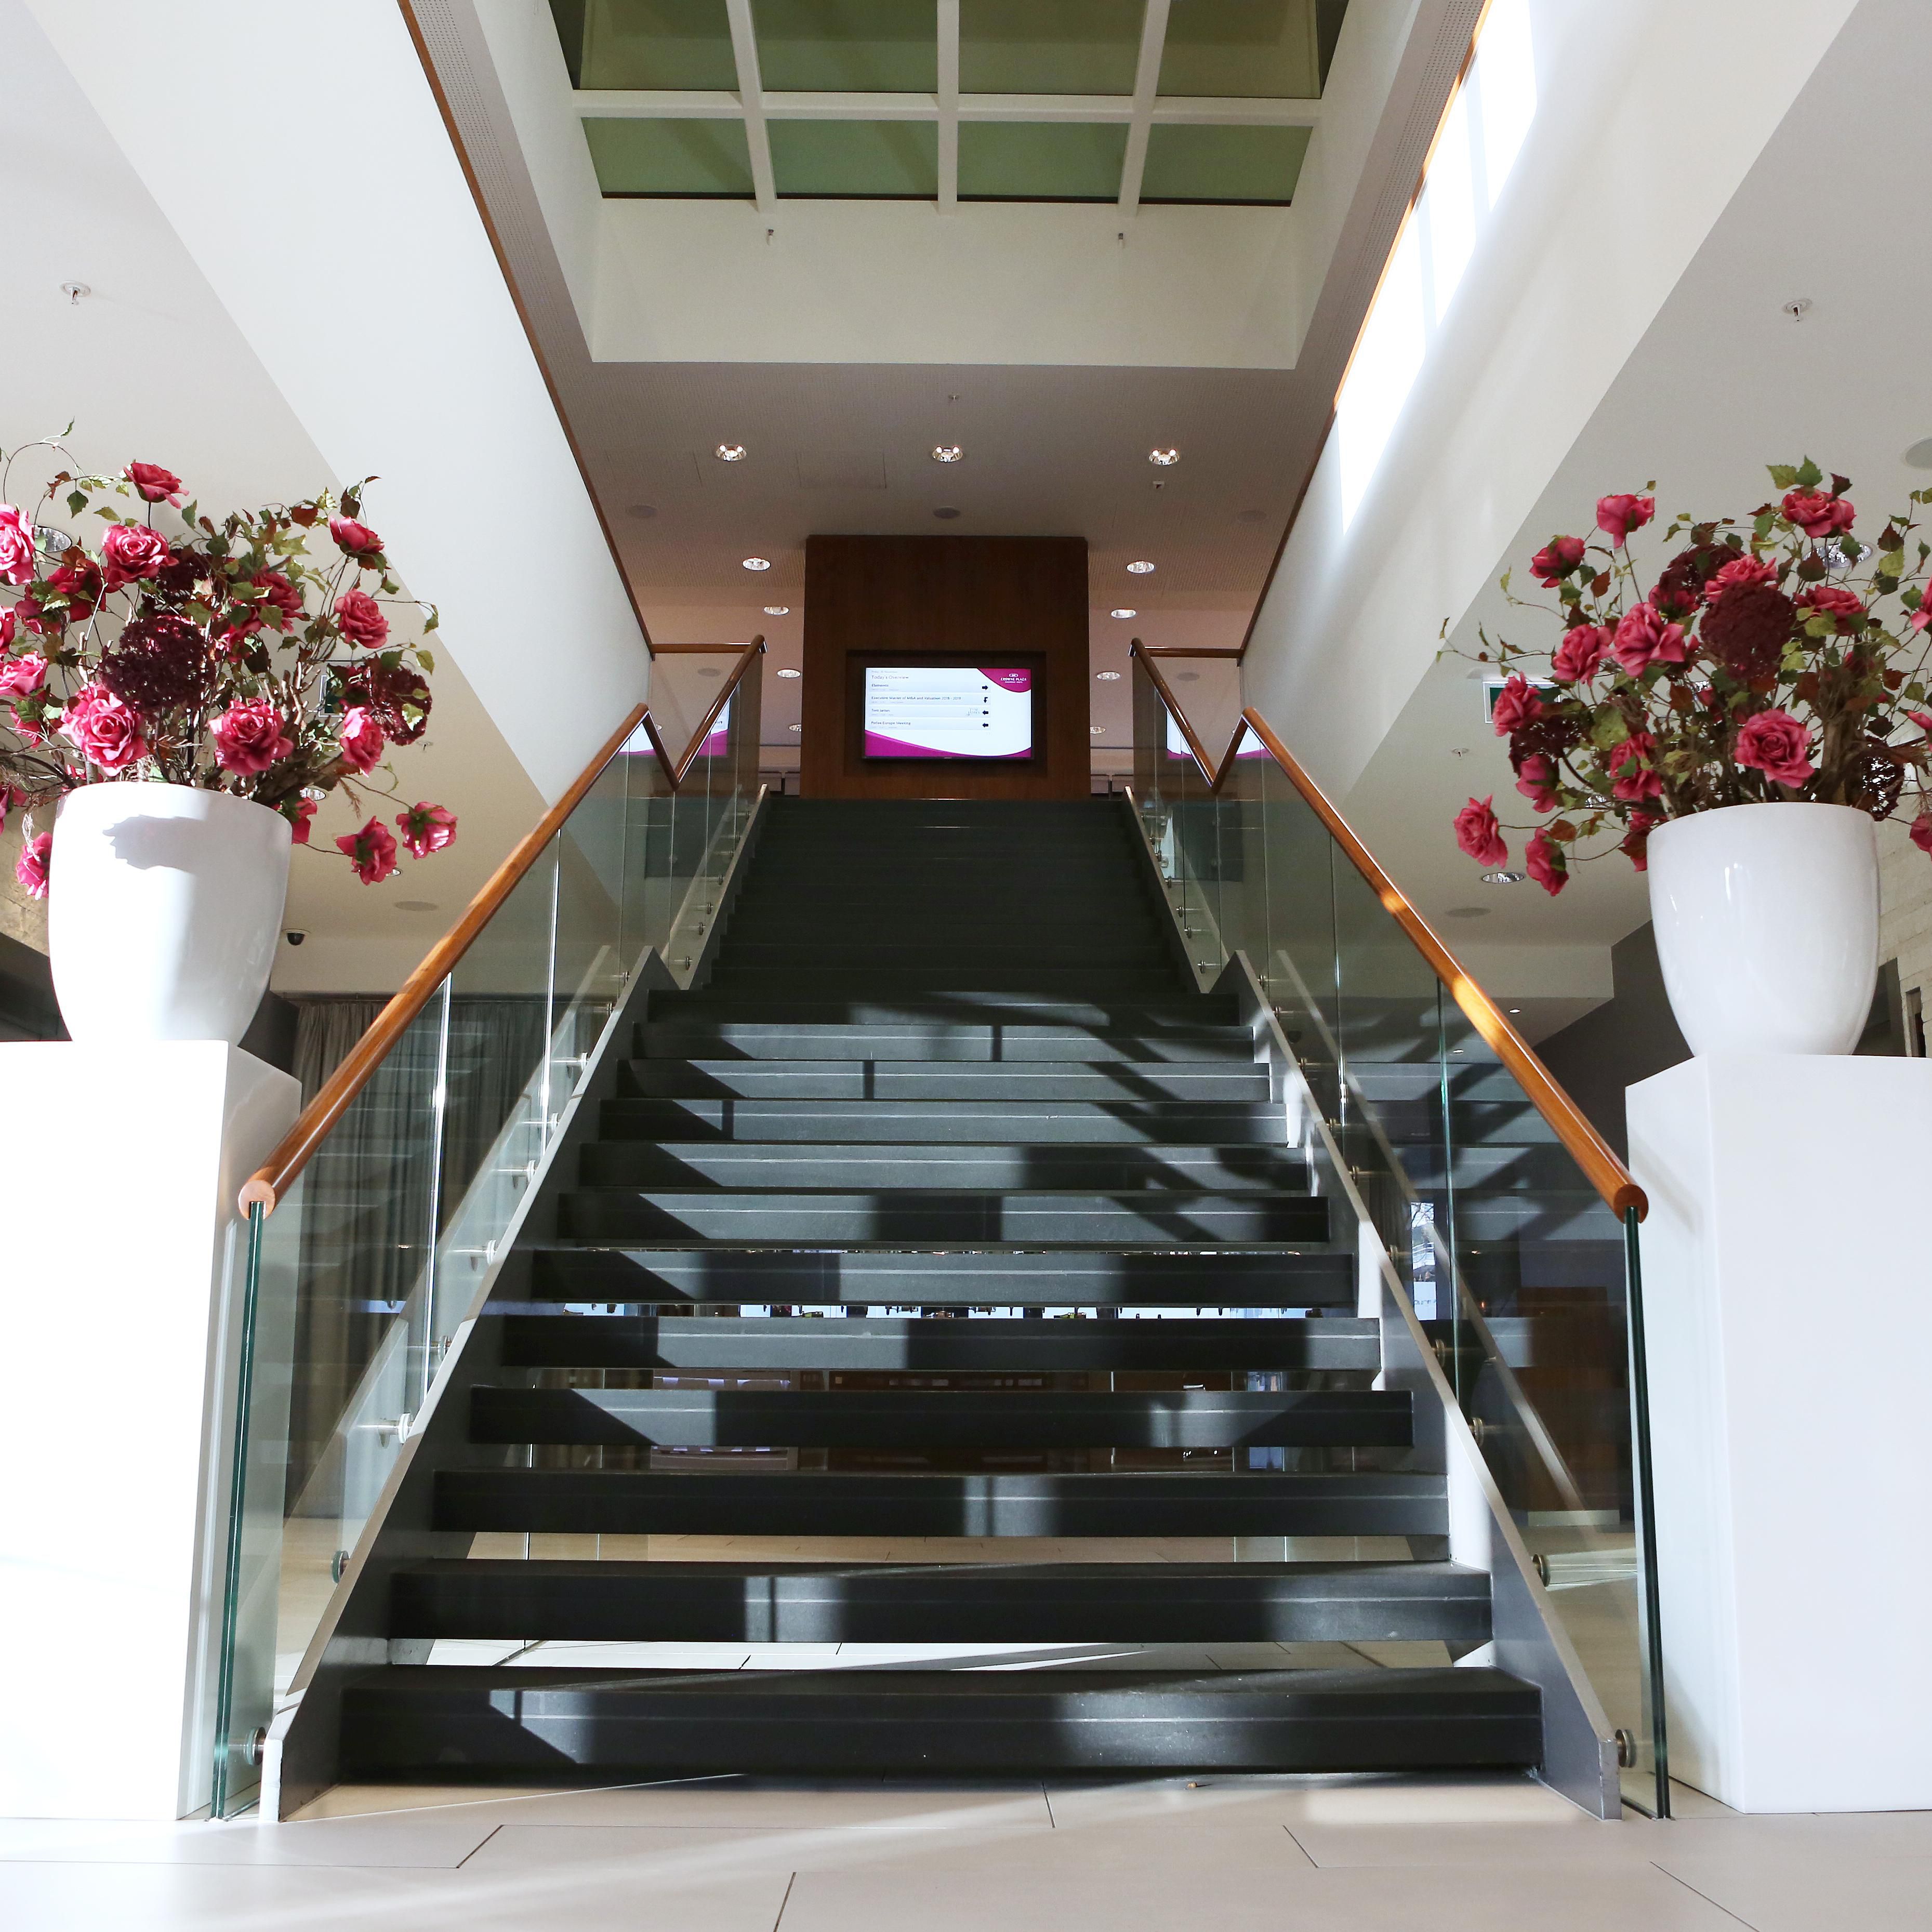 Staircase in the hotel lobby - Crowne Plaza Amsterdam South